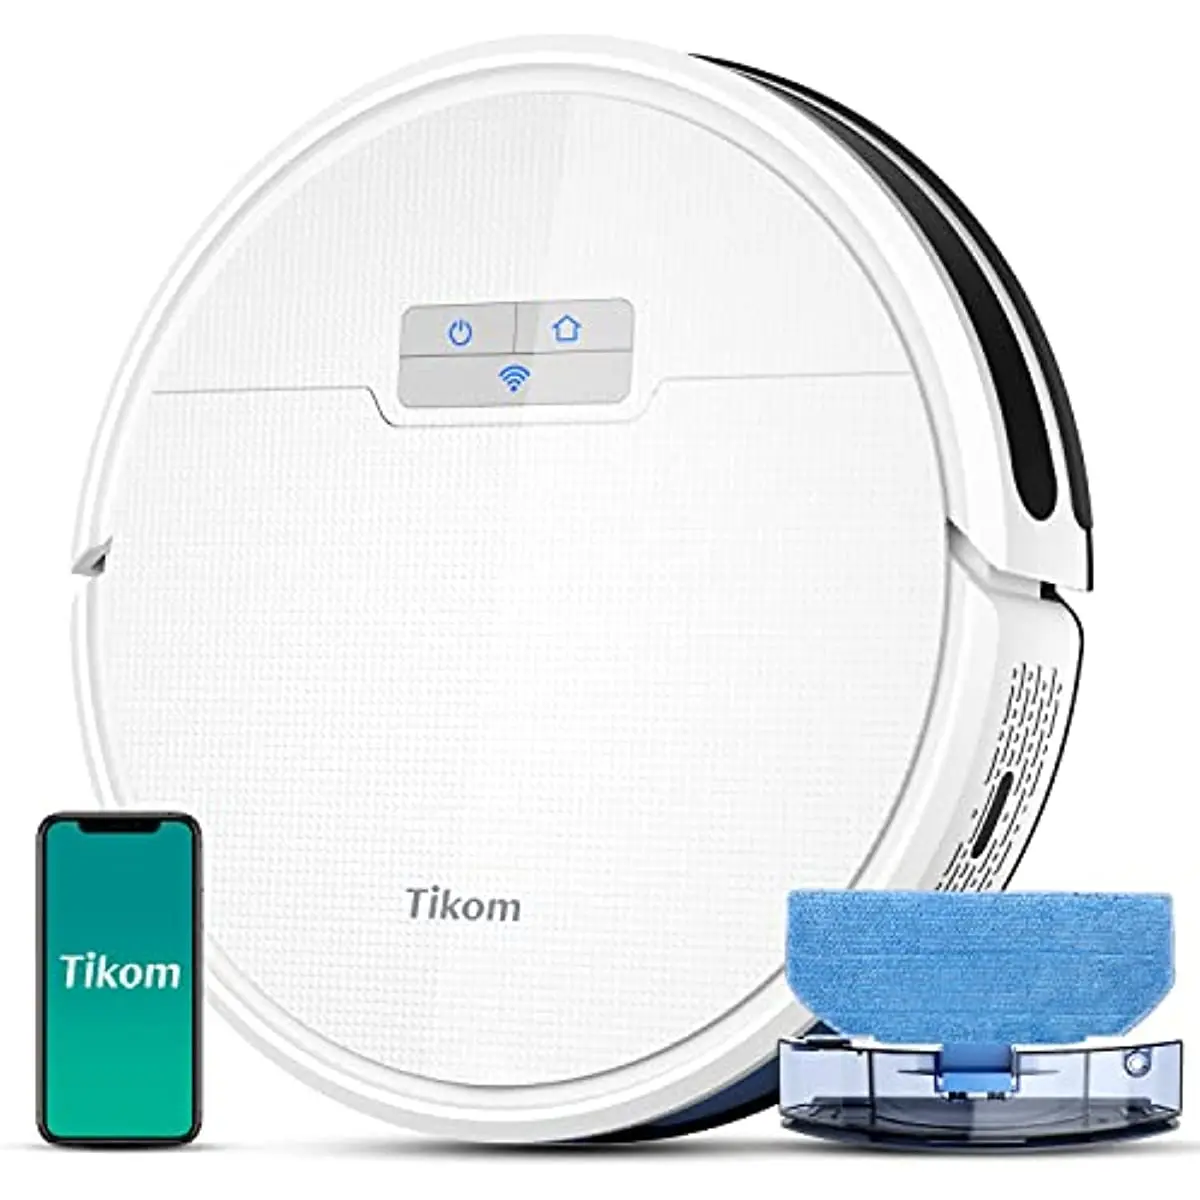 

Tikom Robot Vacuum and Mop Combo 2 in 1, 4500Pa Strong Suction, G8000 Pro Robotic Vacuum Cleaner, 150mins Max, Wi-Fi